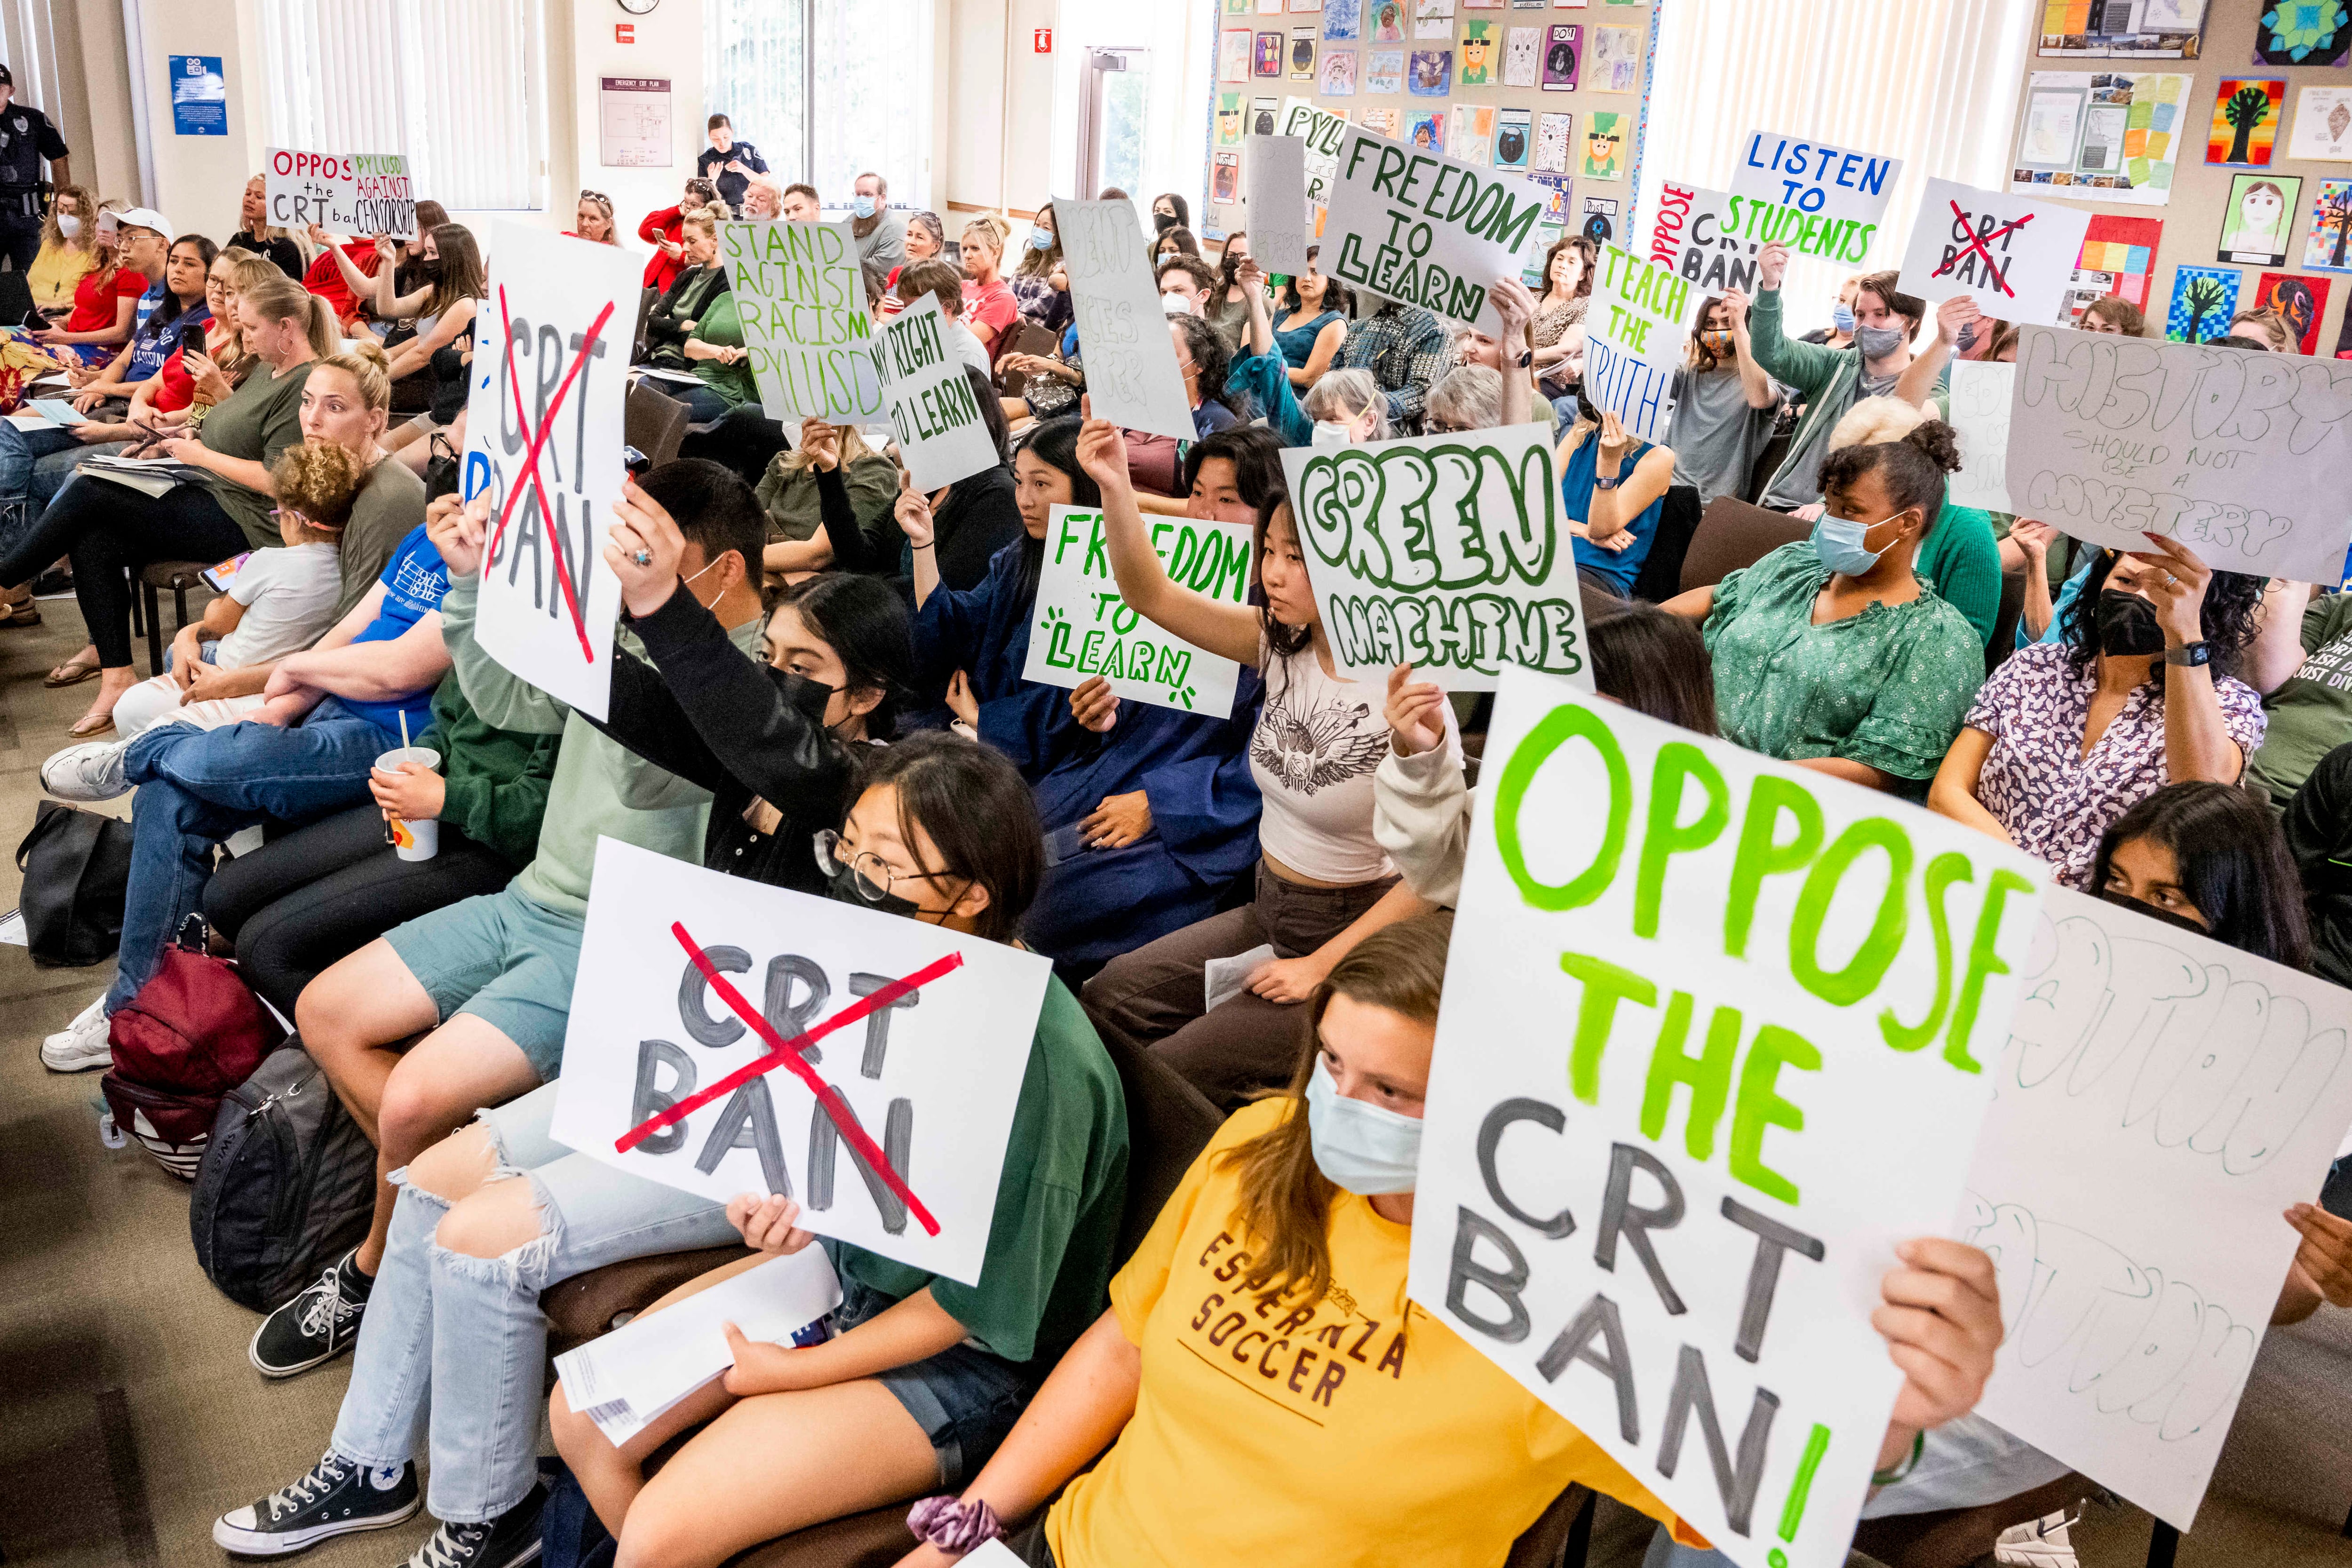 Masked students sitting in chairs hold up signs opposing a proposed ban on teaching CRT, in a room of adults and students.